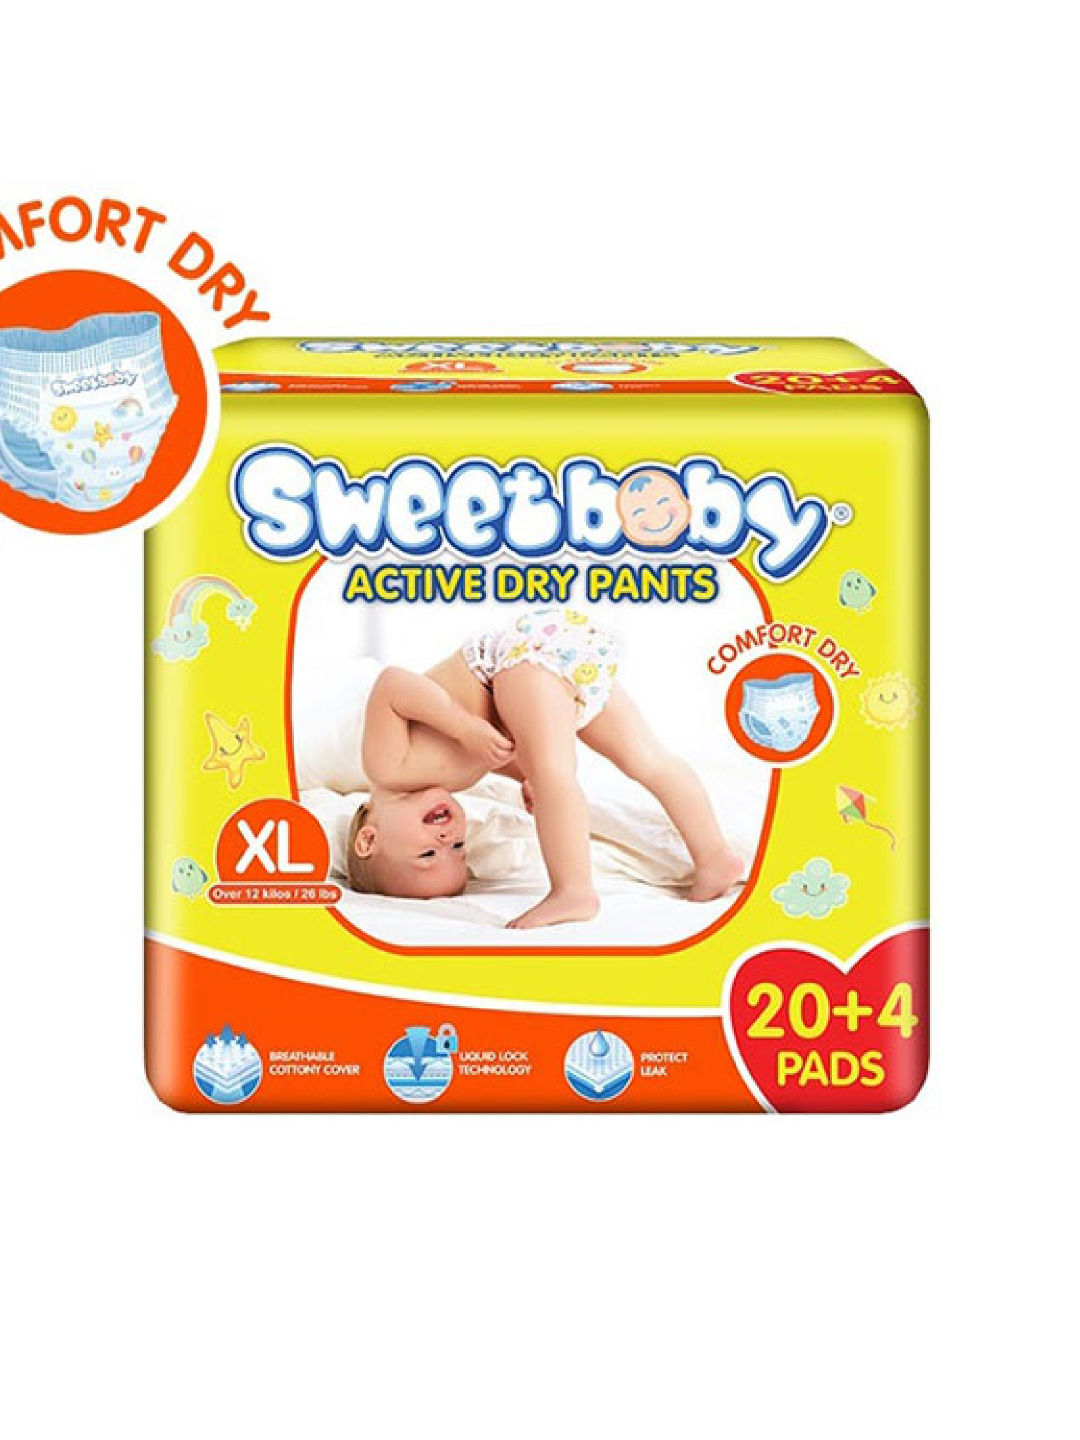 Sweetbaby Active Dry Pants XL (20+4)